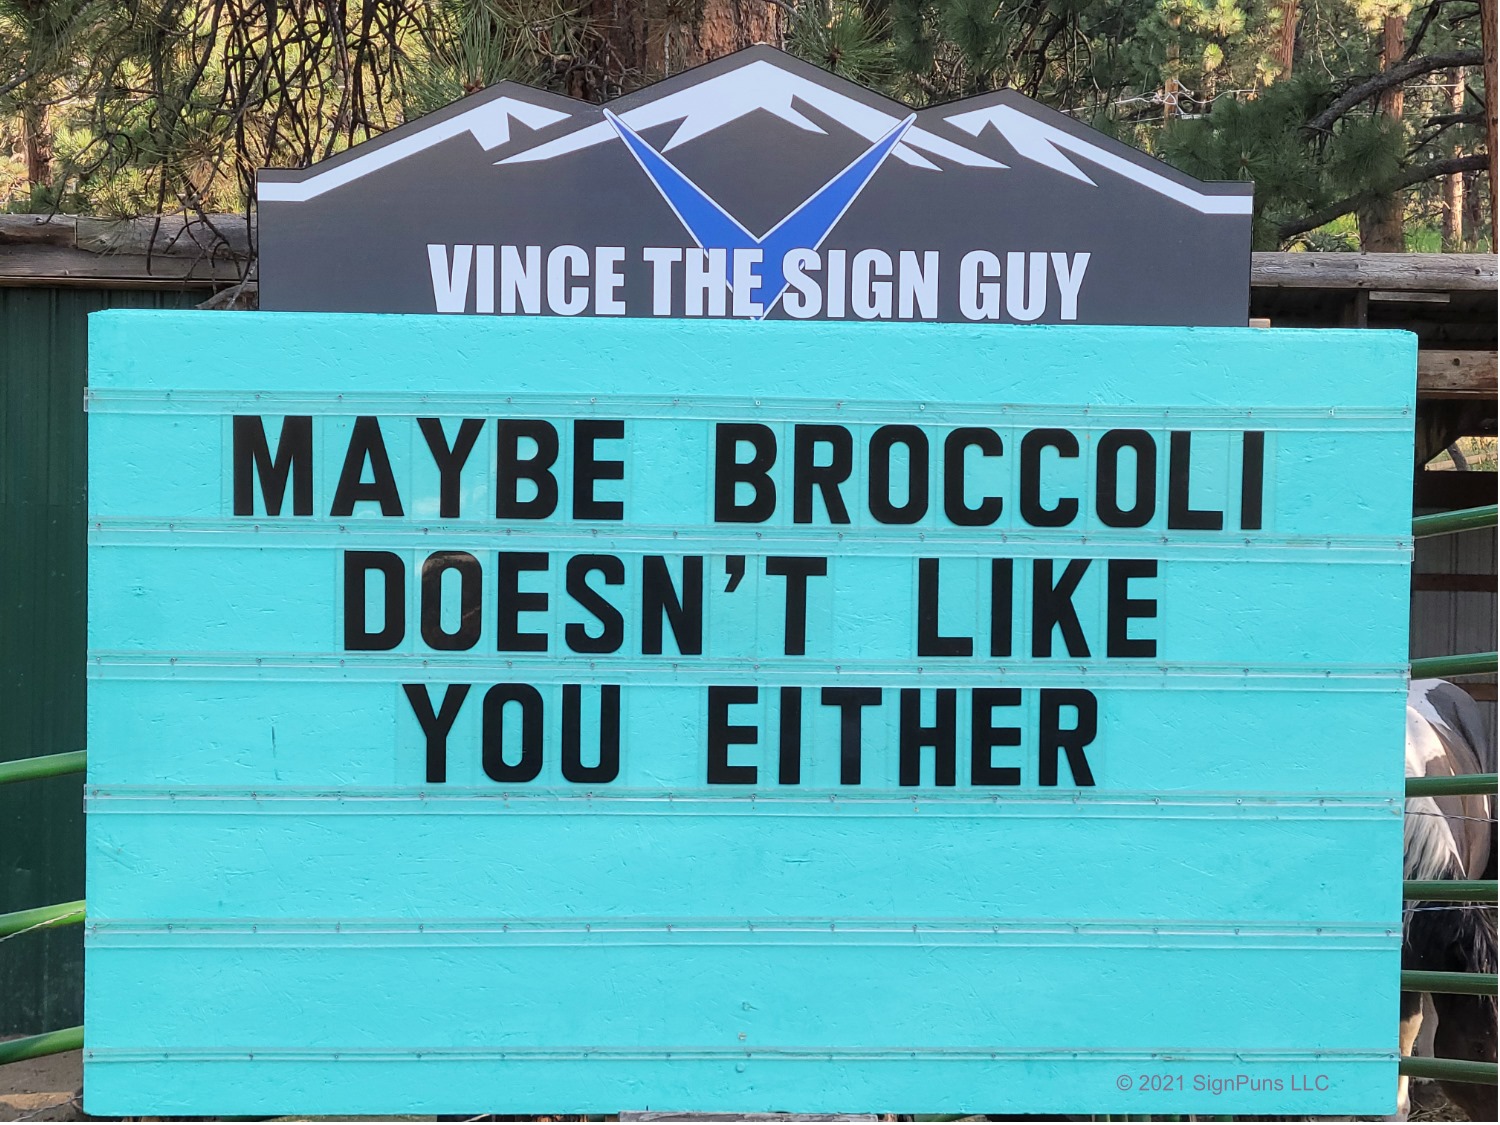 community sign that says: "Maybe broccoli doesn't like you either"